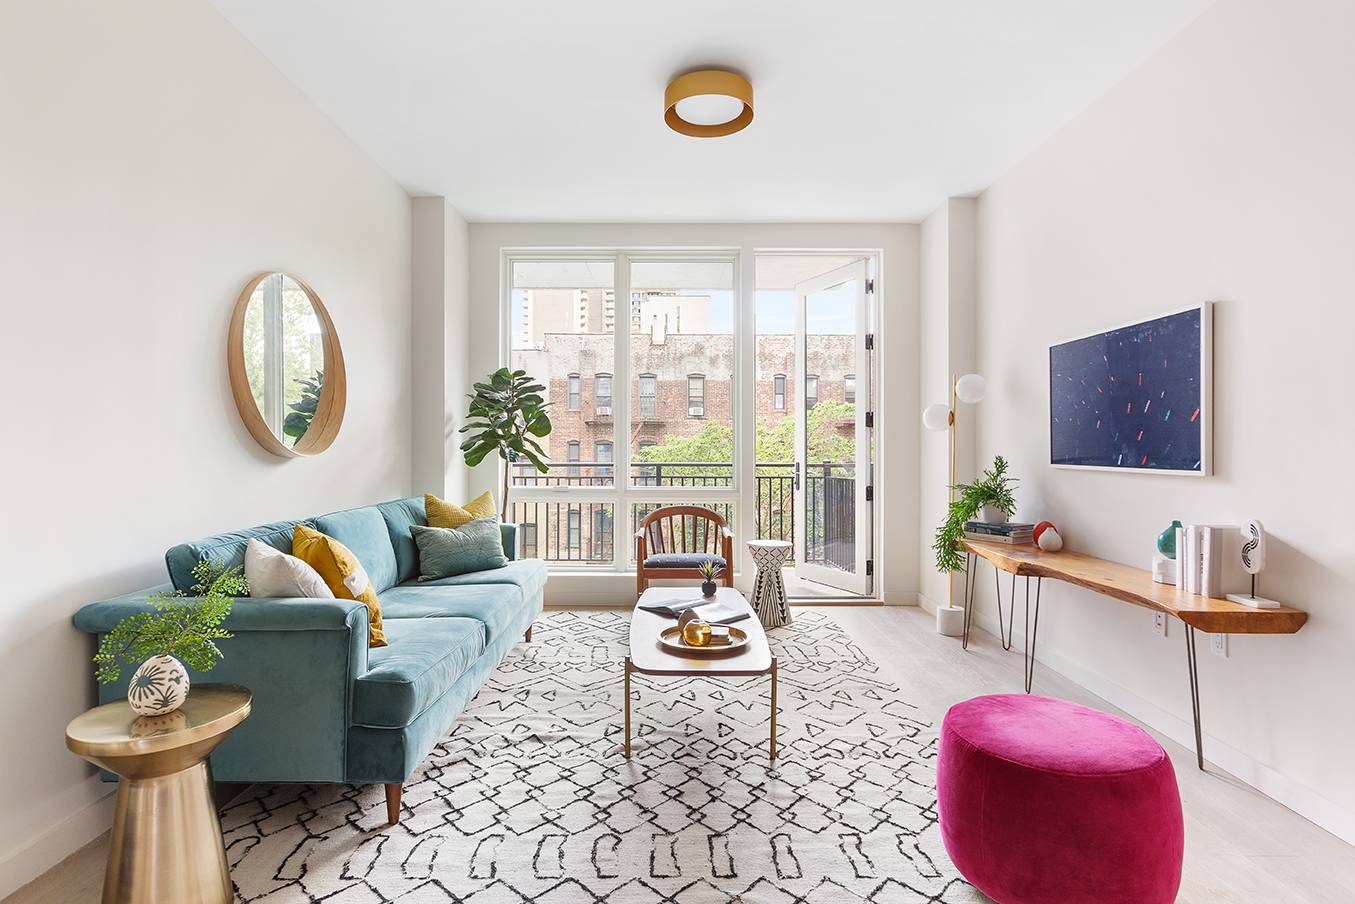 1000 Union is a boutique collection of 20 expertly crafted residences designed by Fischer Makooi Architects, bringing a new standard of livable luxury to Crown Heights.